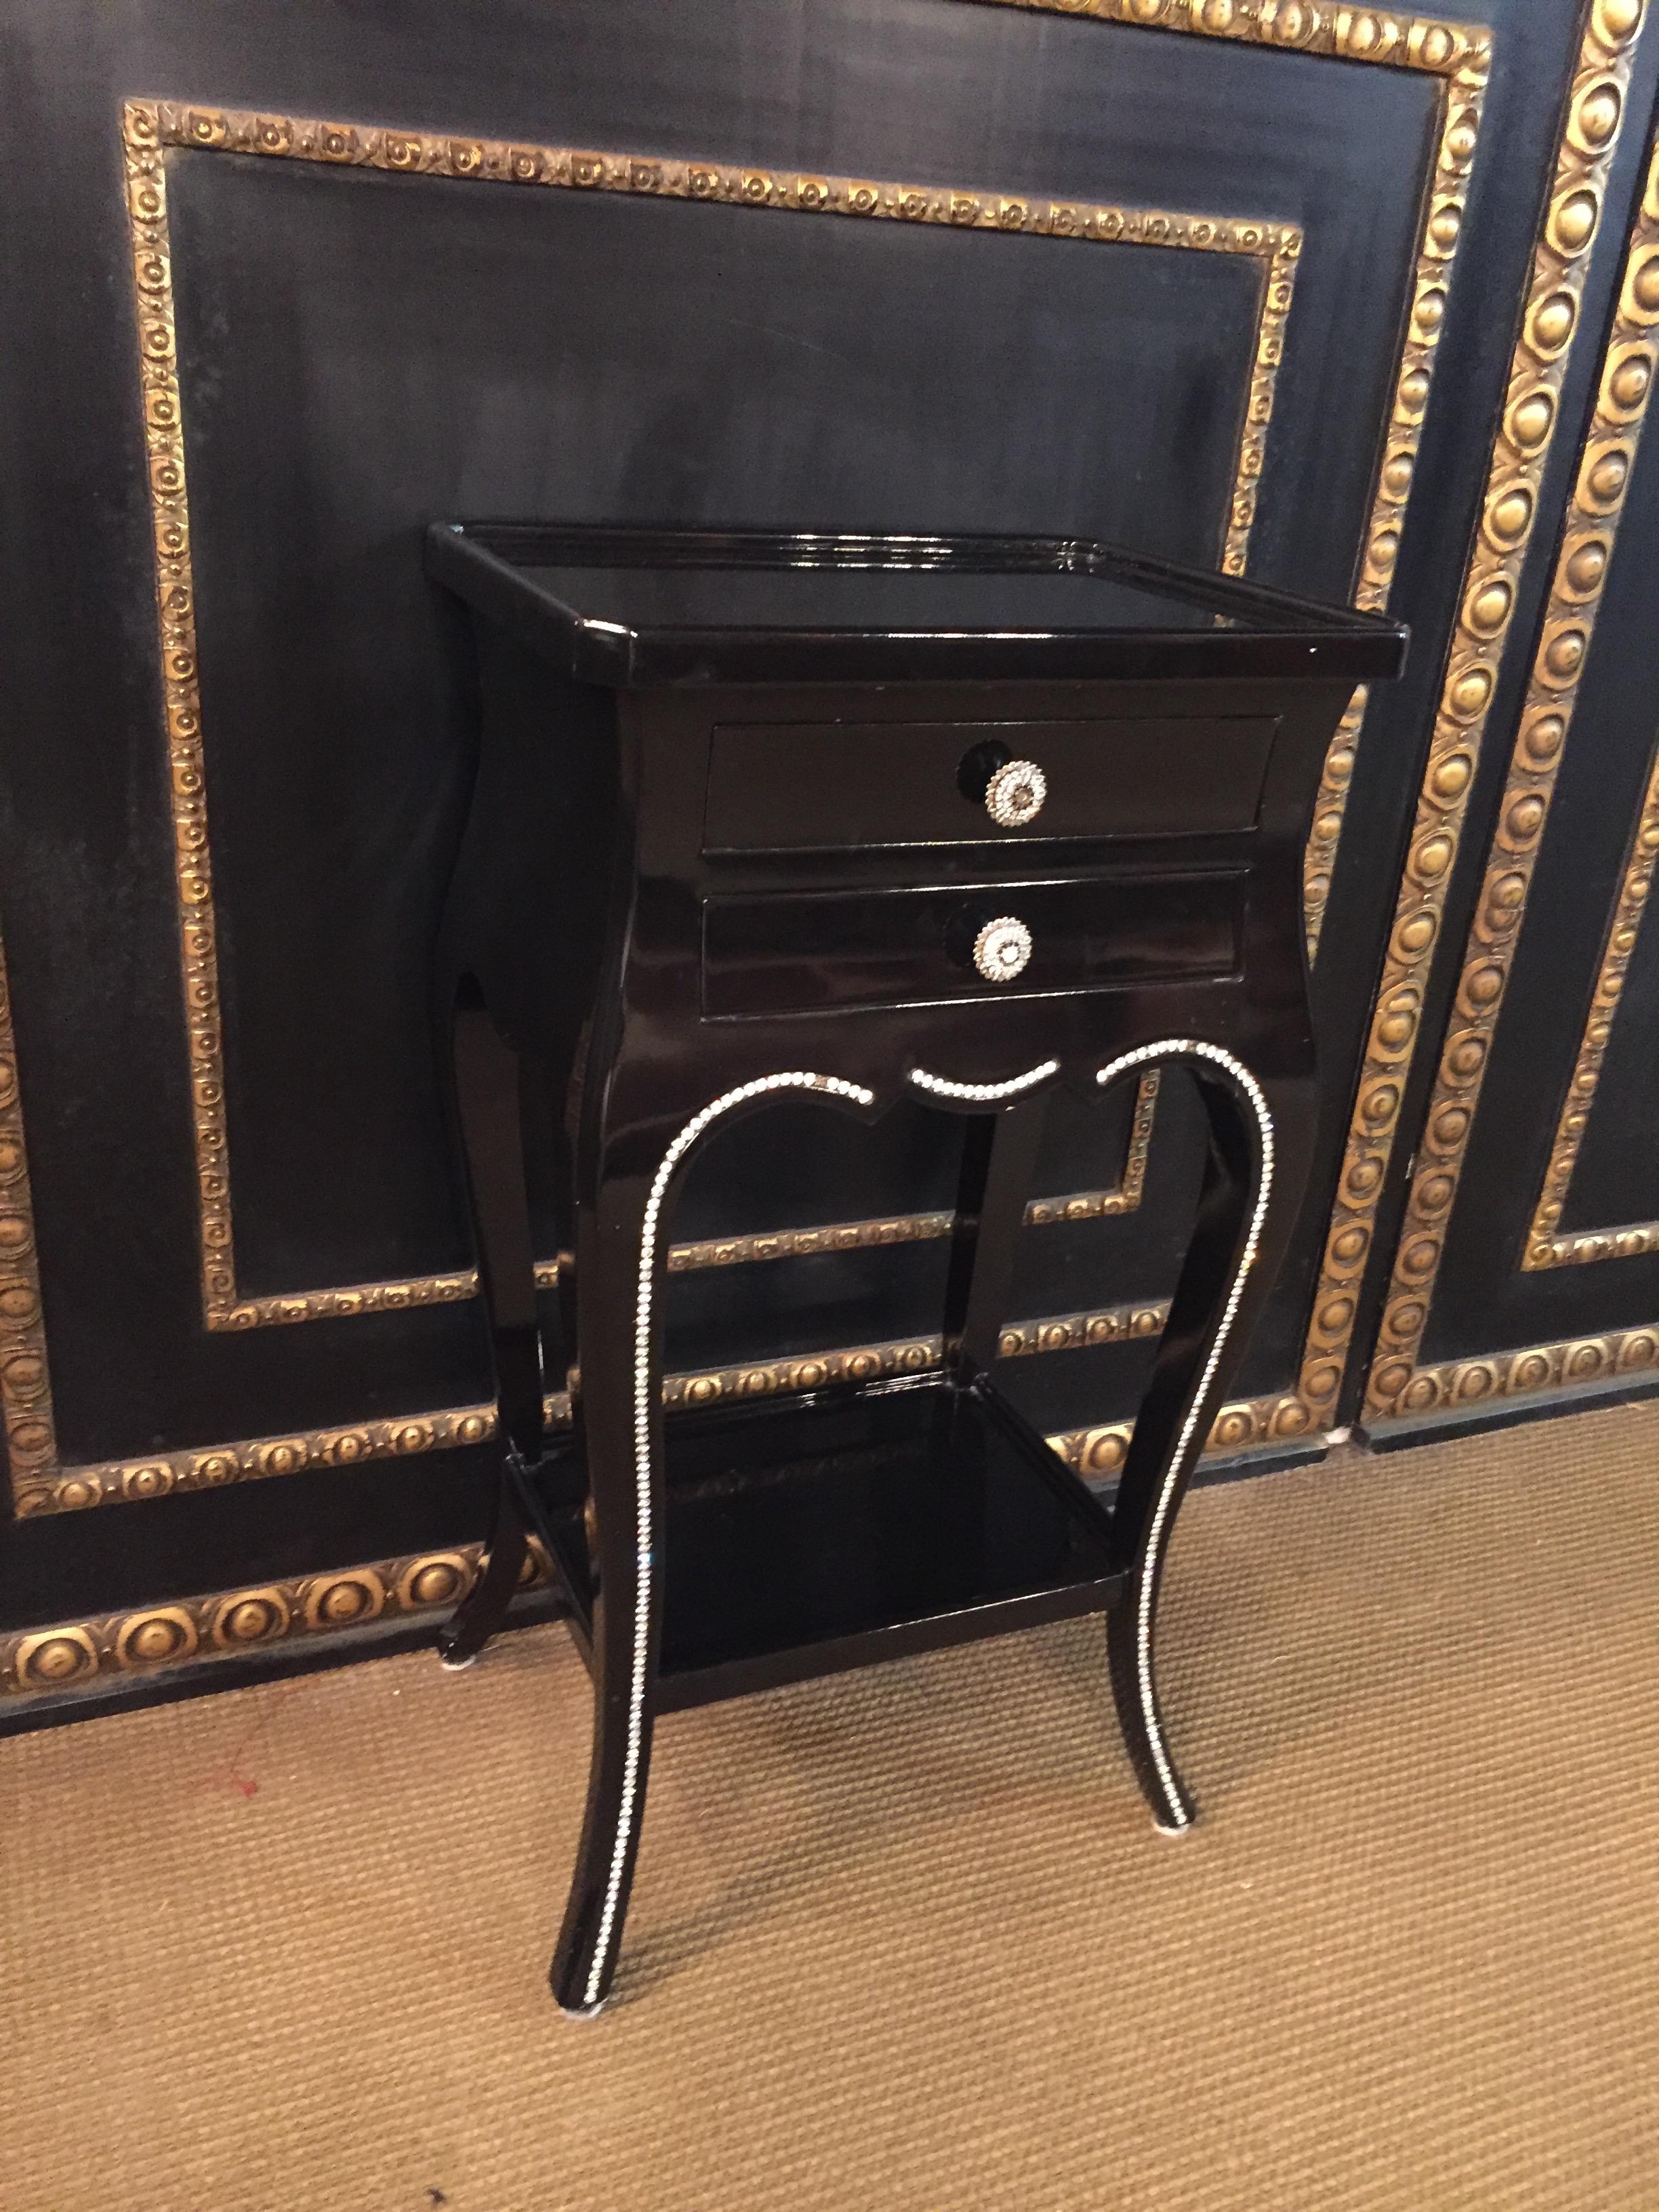 Nice side table
with two drawers,
on the sides and front ornamented with svarowski stones, crystals.